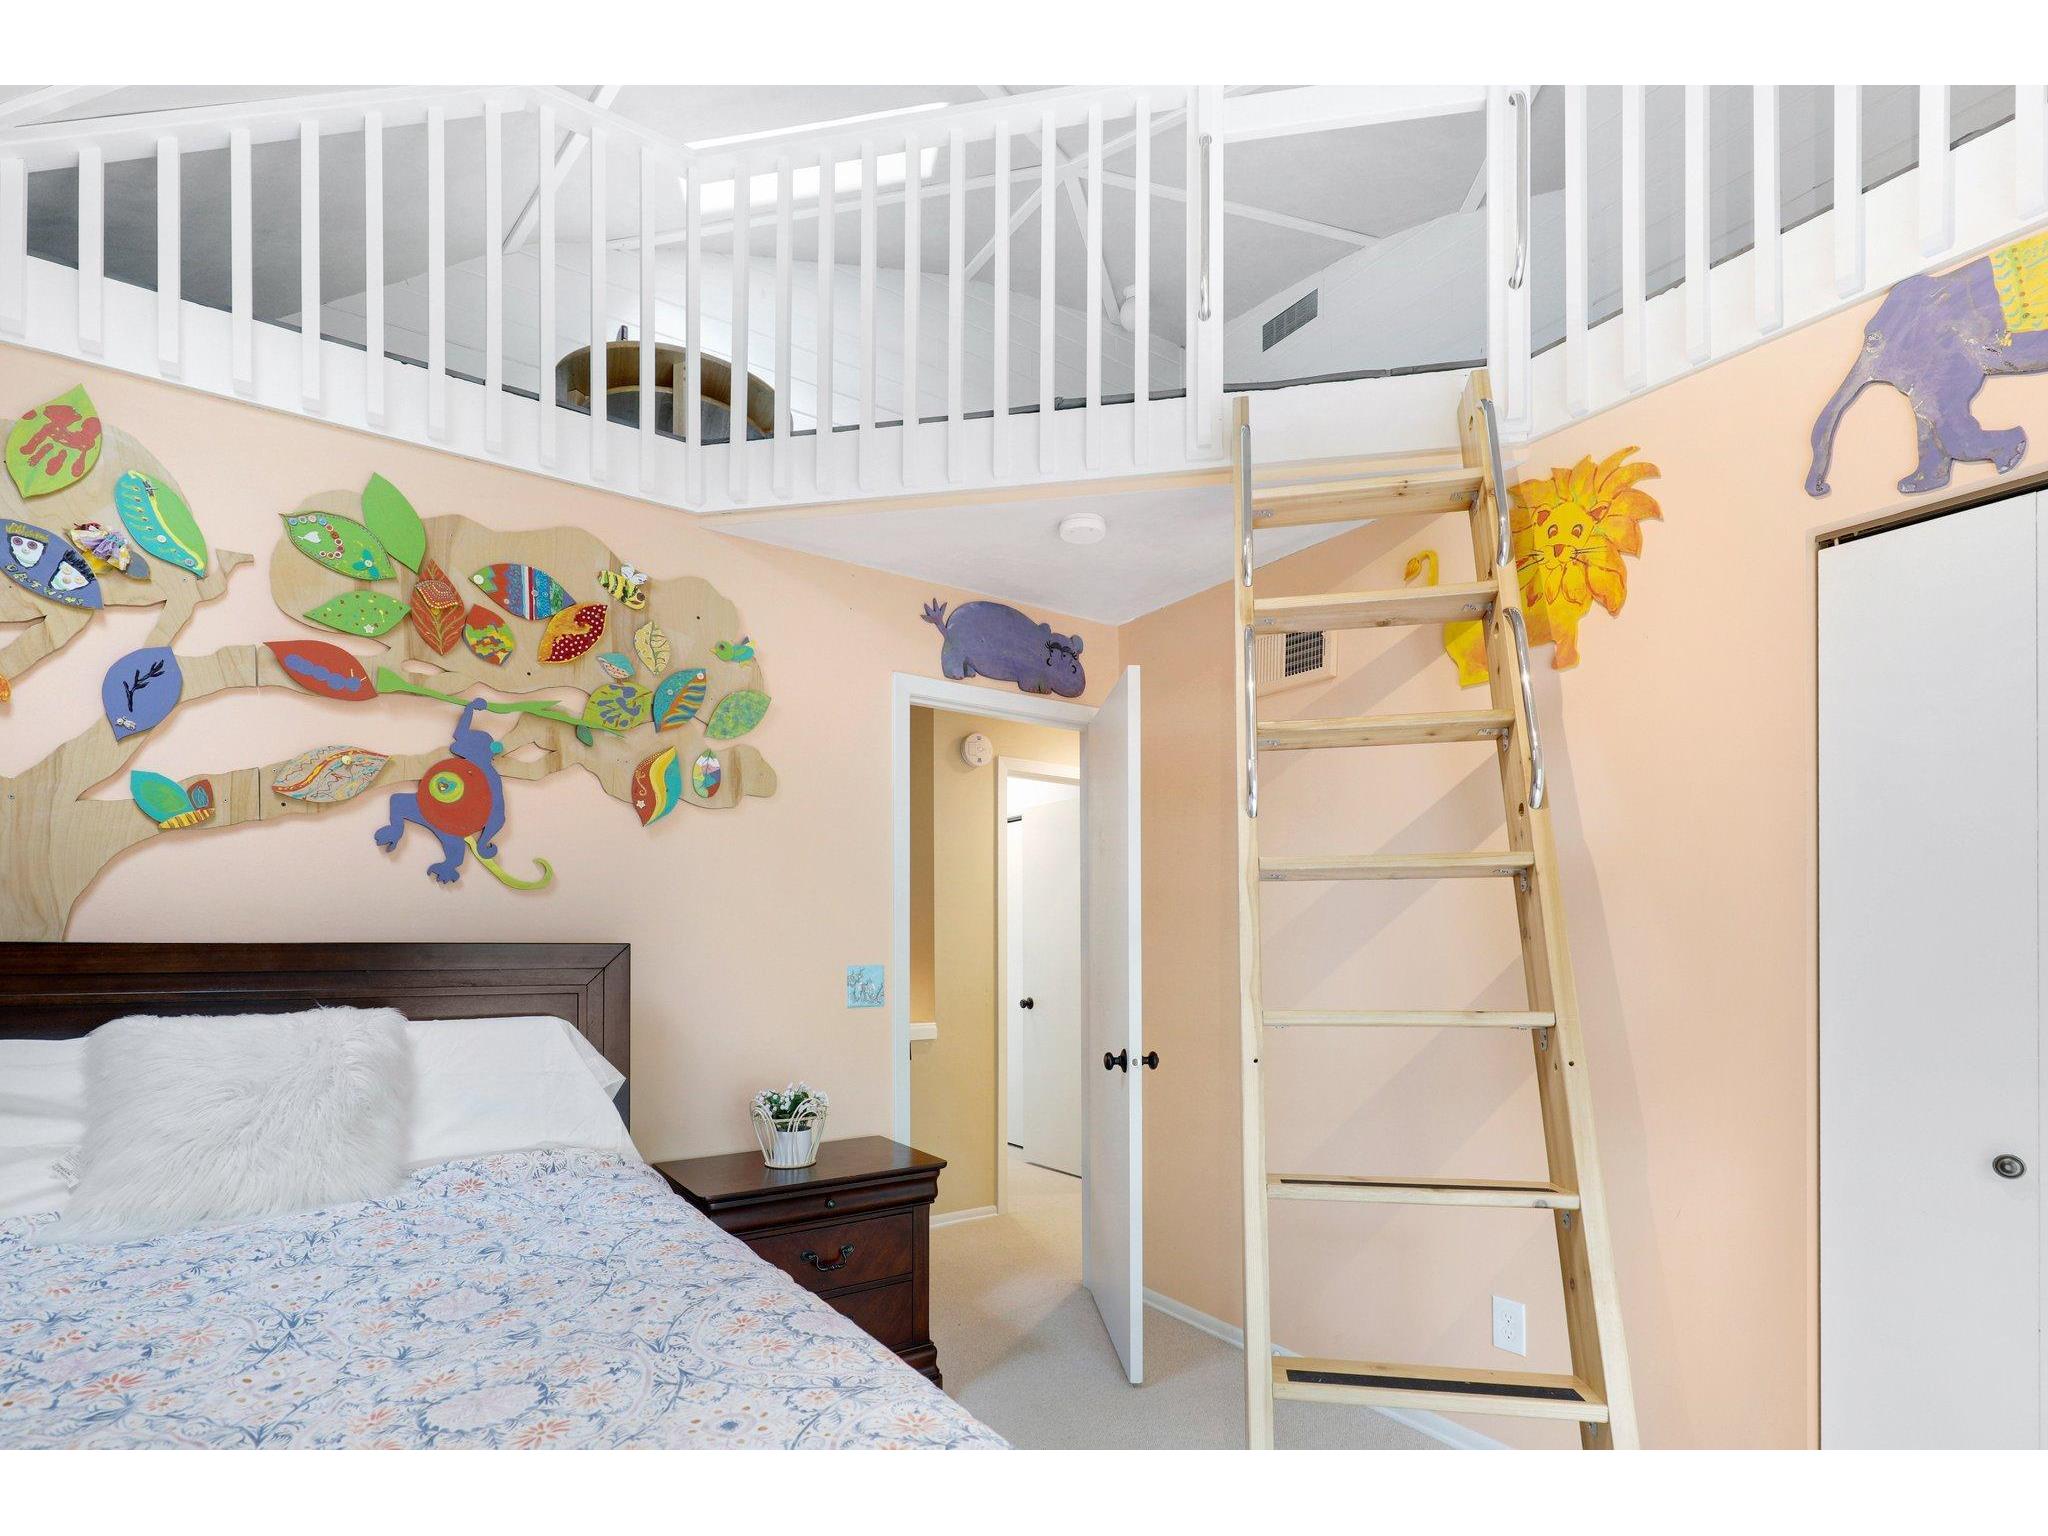 Childrens bedroom with a loft play area